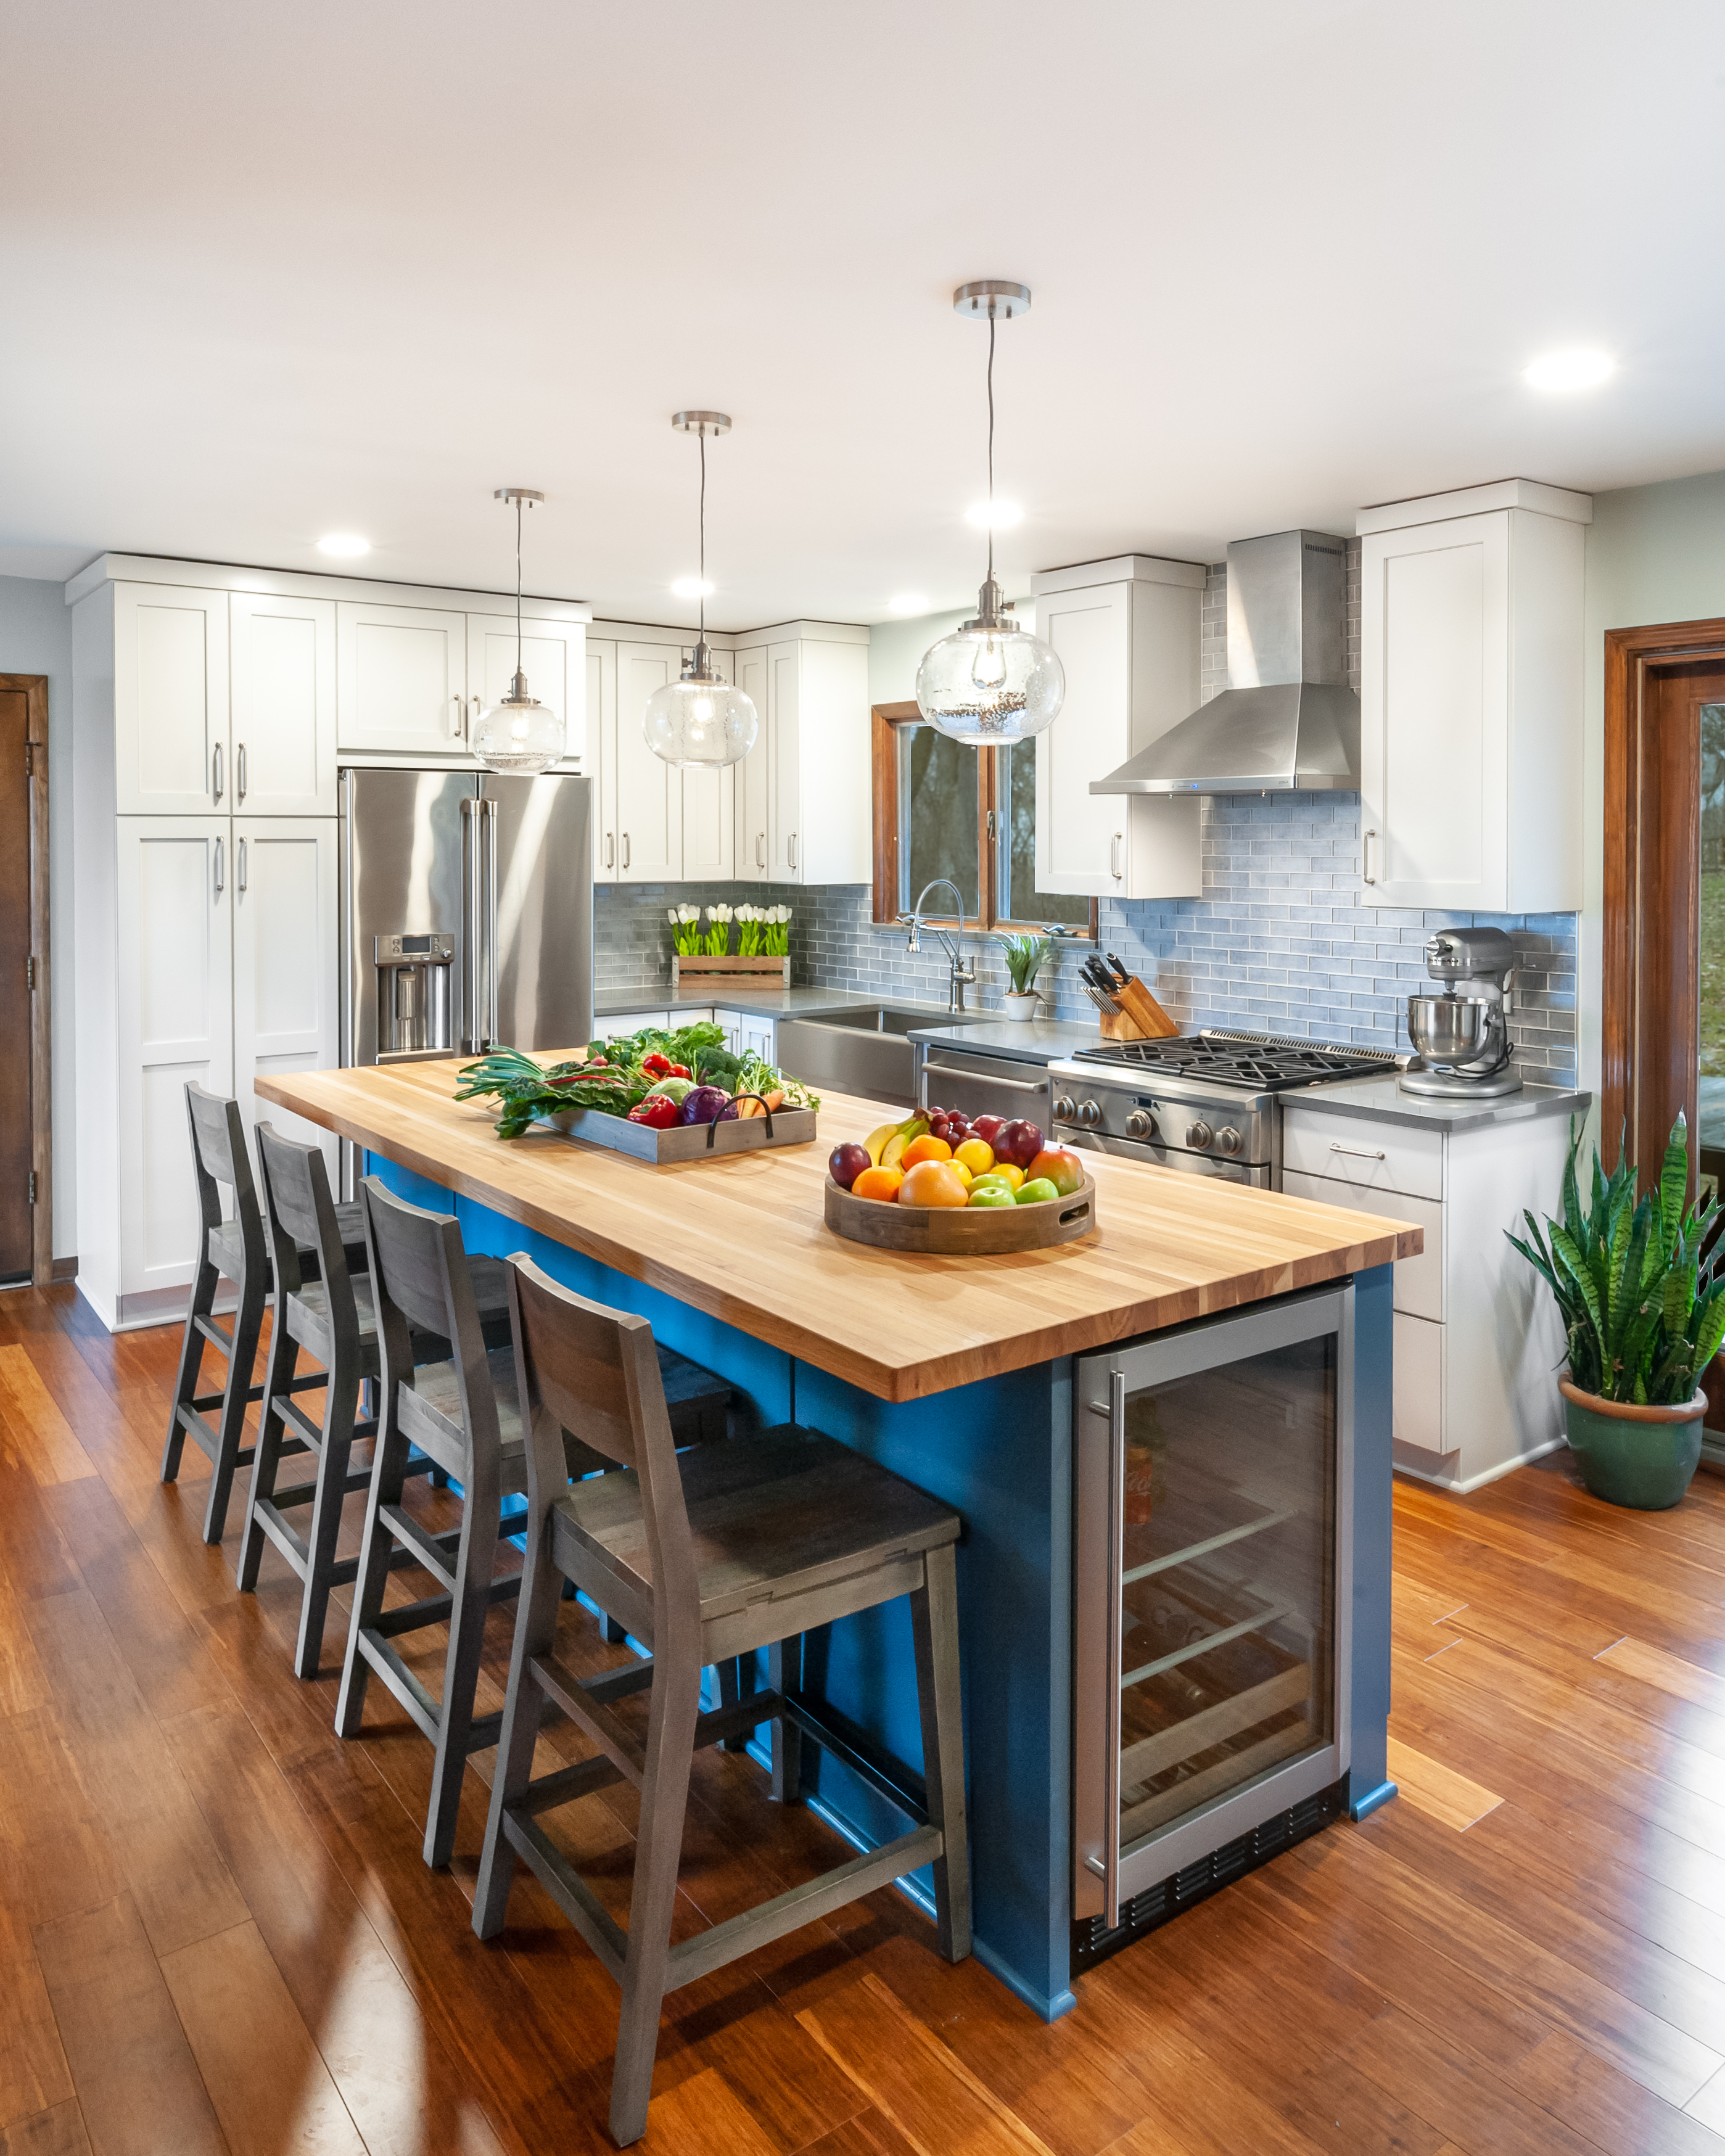 Kitchen Remodeling Typically Cost, How Much Does It Cost To Remodel A Kitchen In Florida